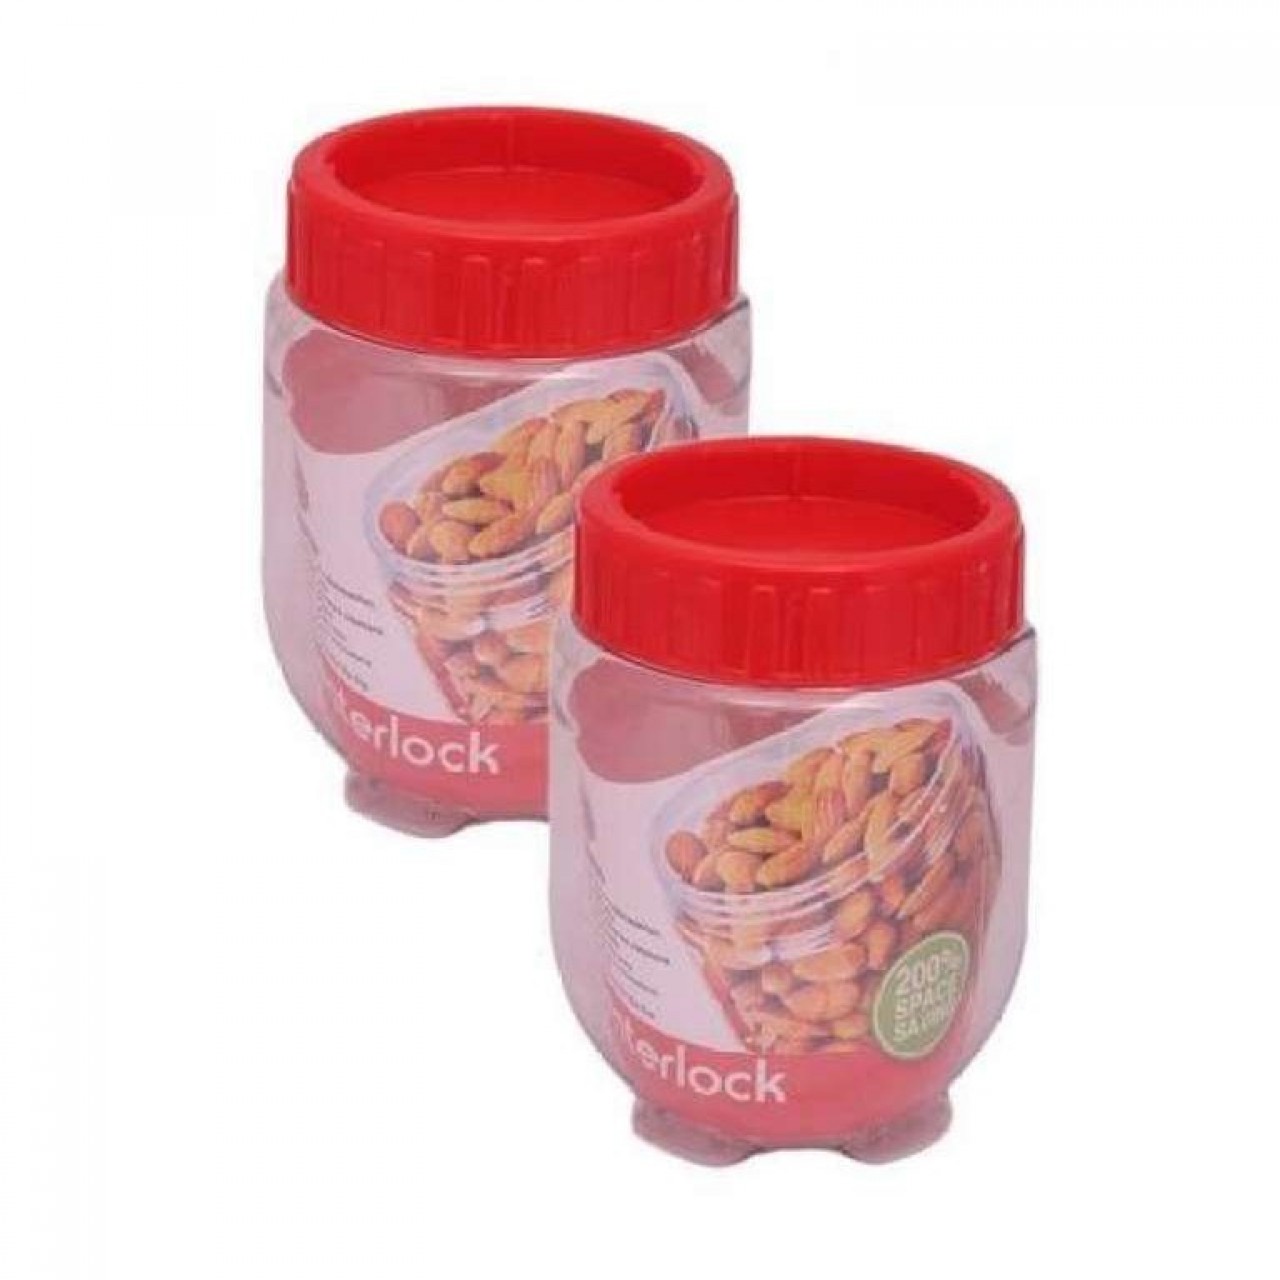 https://farosh.pk/front/images/products/fpl-688/pair-of-air-tight-plastic-jar-967147.jpeg